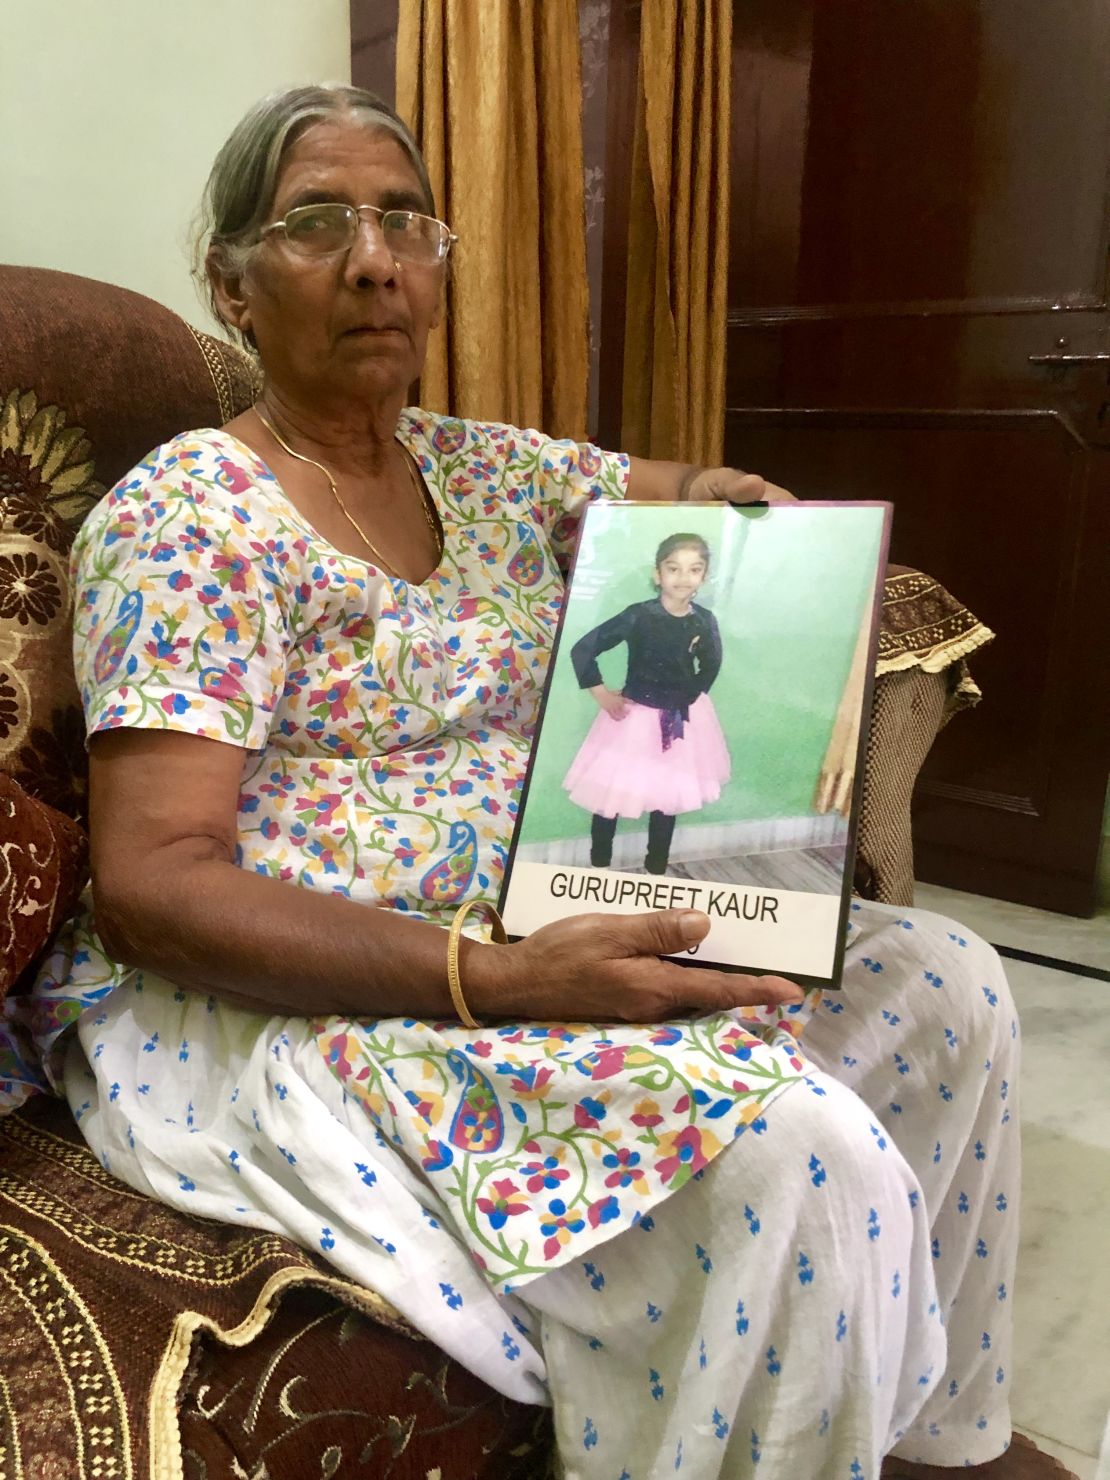 Surinder Kaur says she fainted when she heard the news of her granddaughter's death. "After I regained my consciousness, I just kept repeating her name. I wanted to see her one last time."